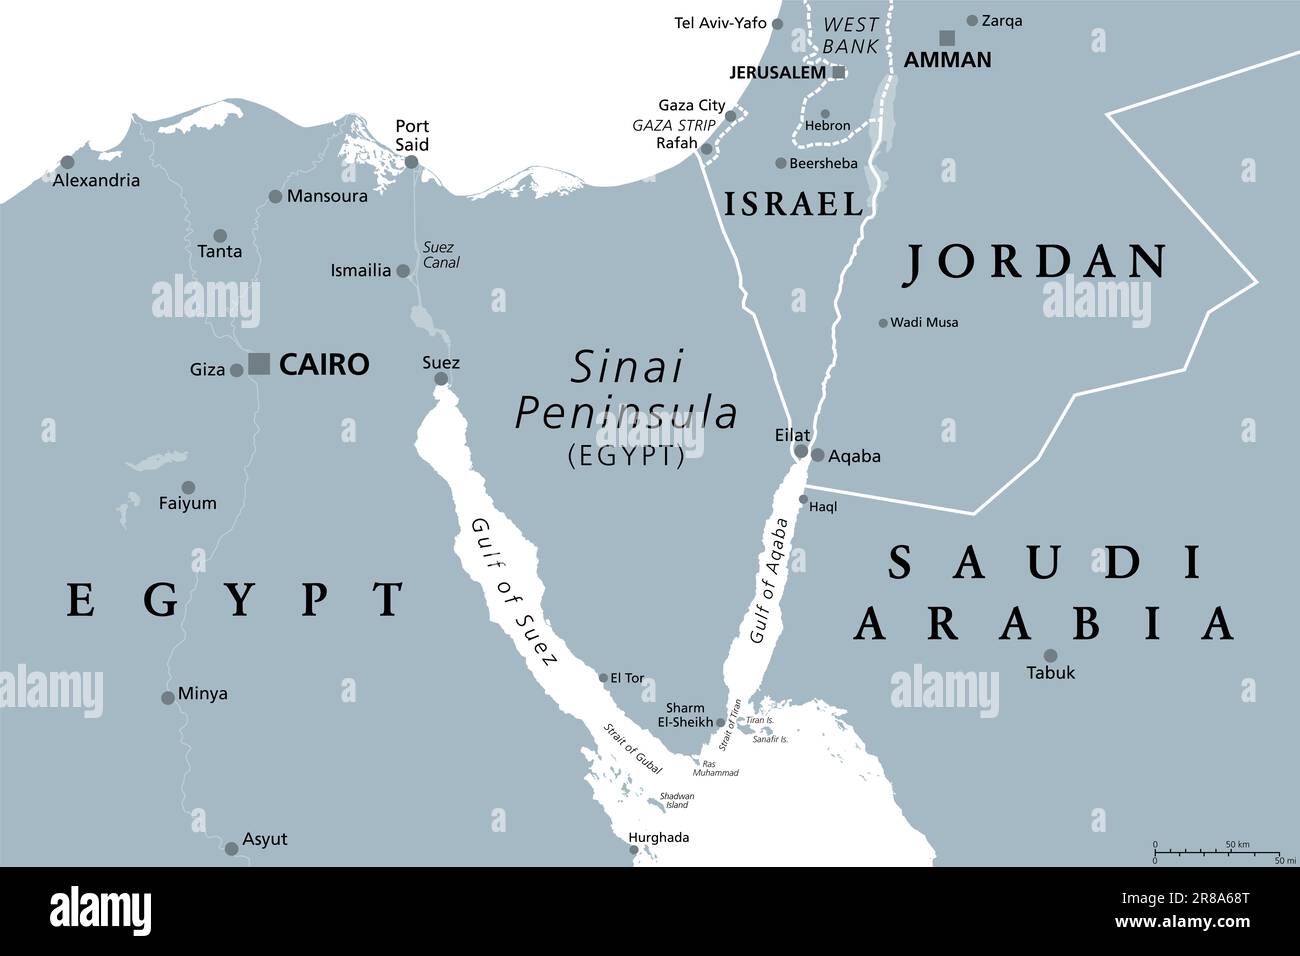 Sinai Peninsula, gray political map. Peninsula in Egypt, located between Mediterranean and Red Sea, land bridge between the continents Asia and Africa. Stock Photo